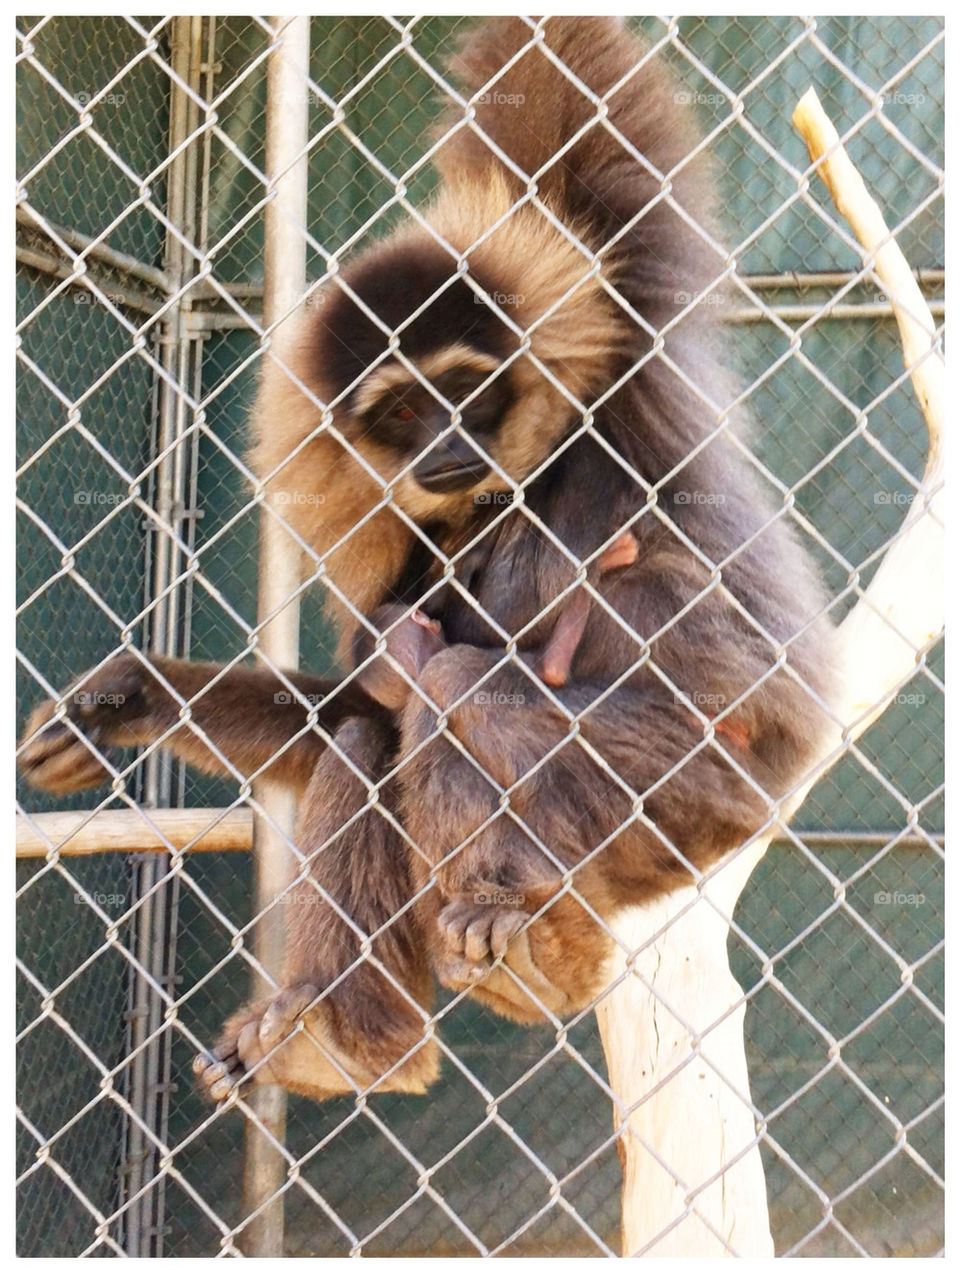 Gibbon and Baby